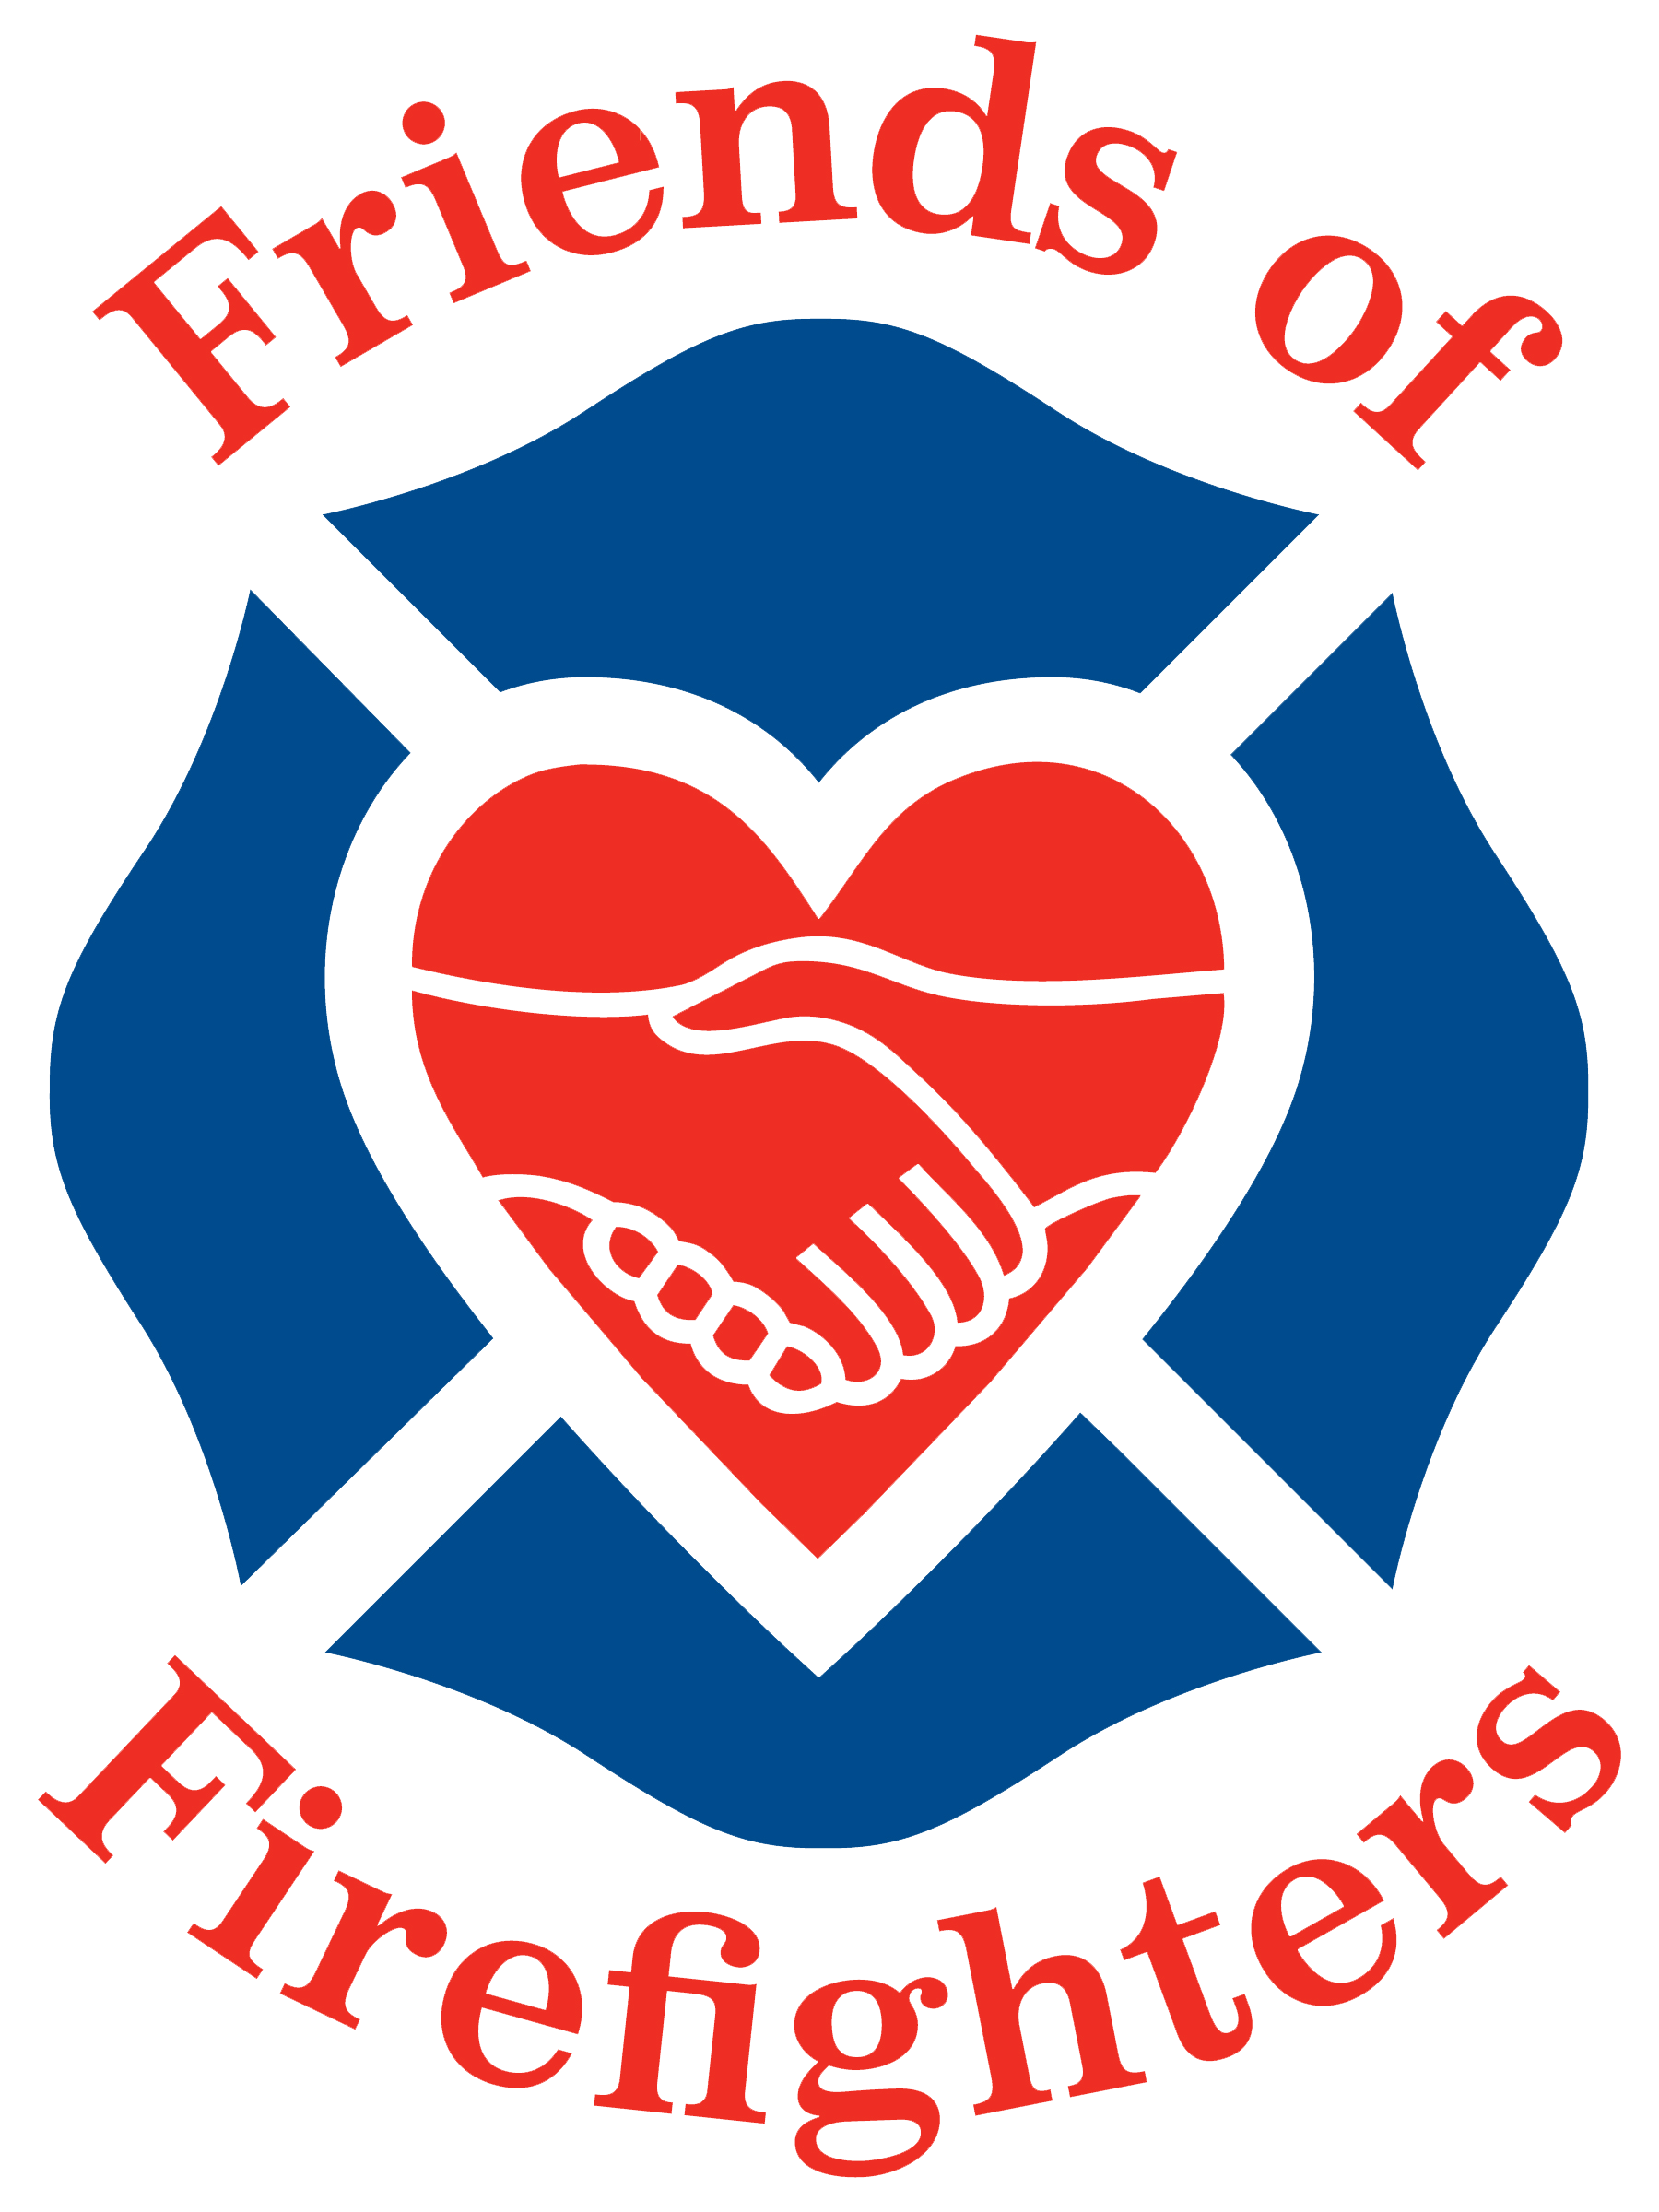 Friends of Firefighters image